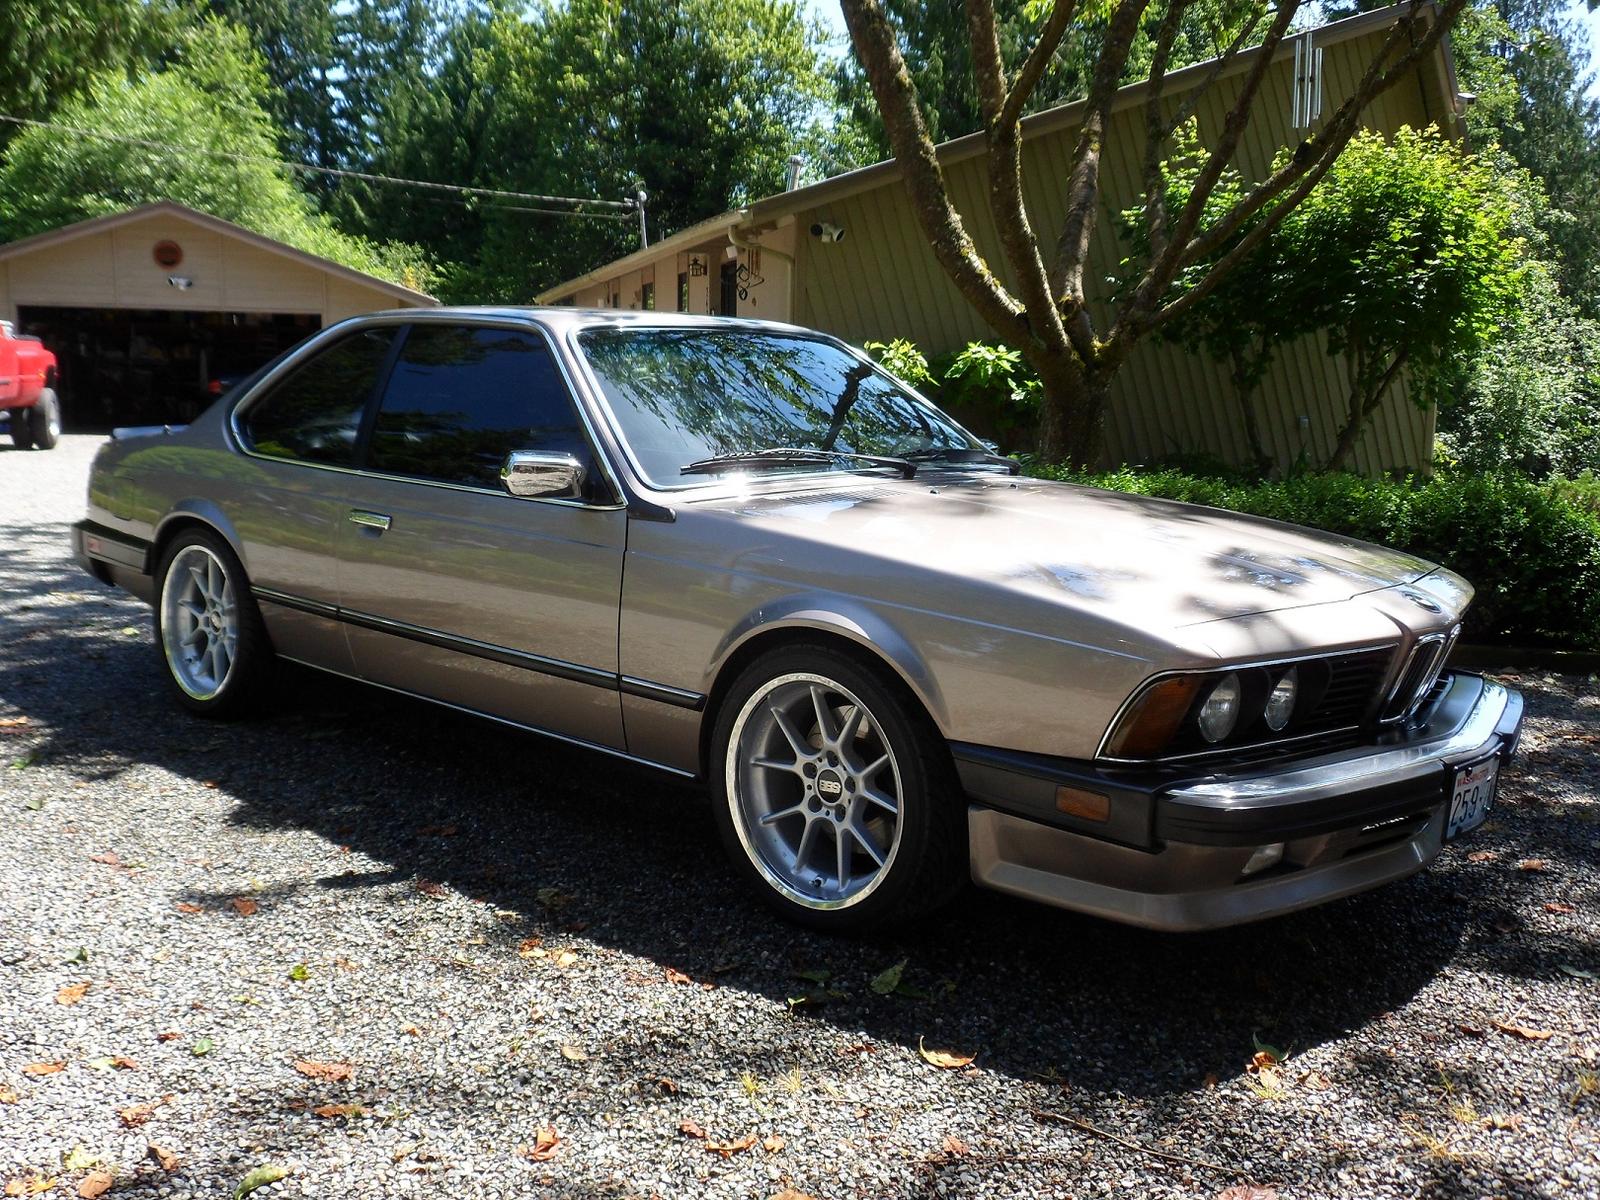 Bmw for sale in seattle area #2